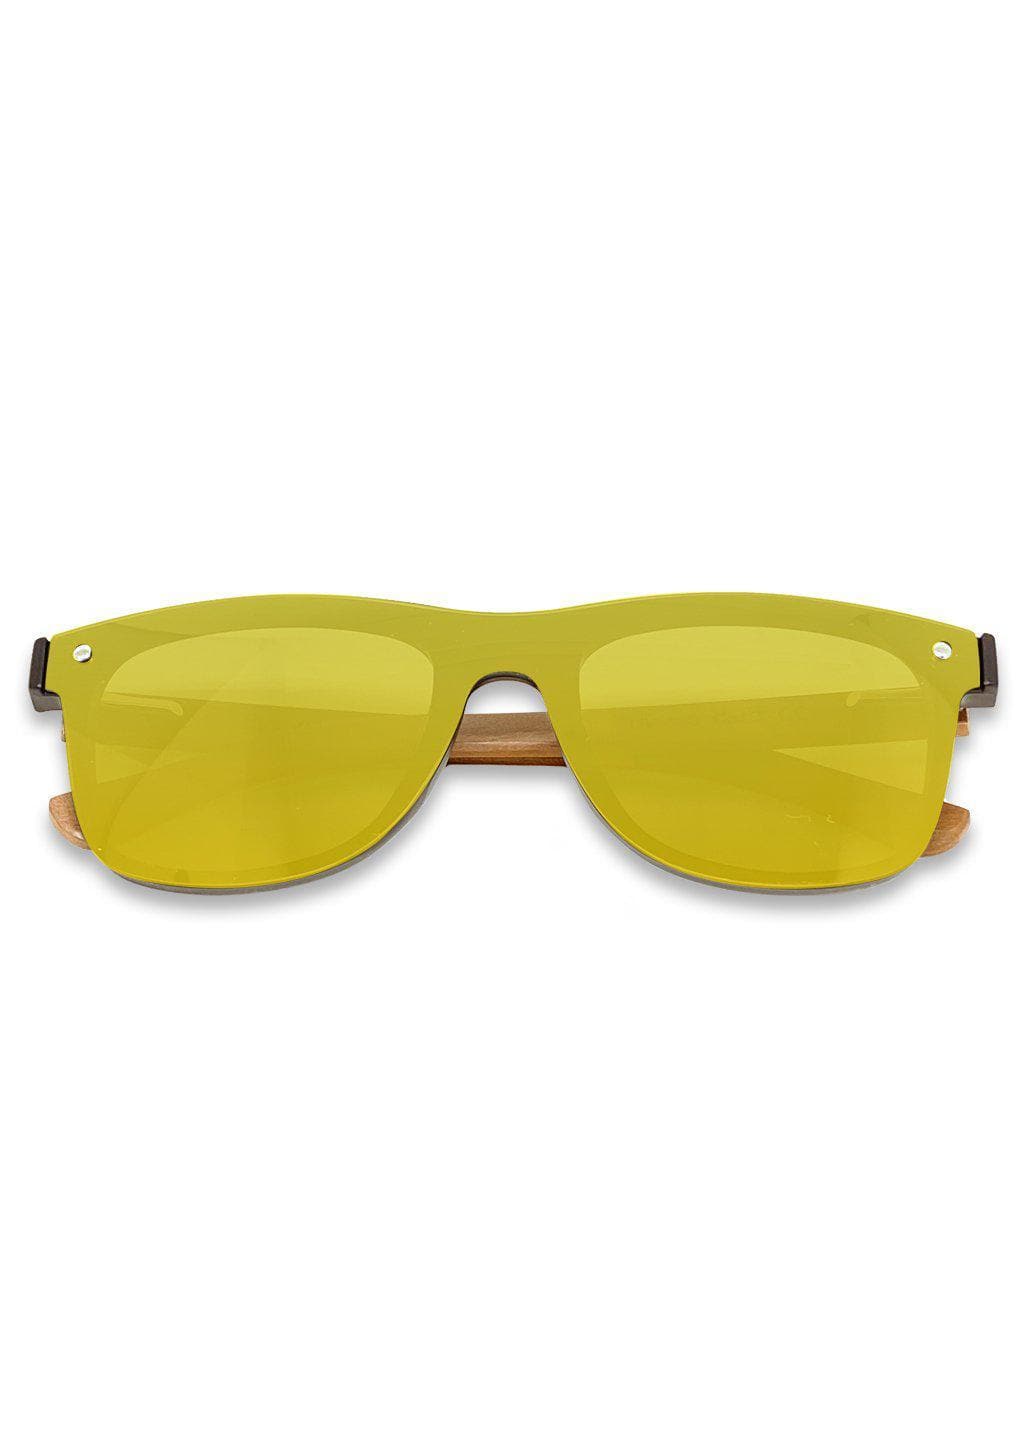 Eyewood tomorrow is our modern cool take on classic models. This is Scorpius with yellow mirror lenses. Nice wooden sunglasses.